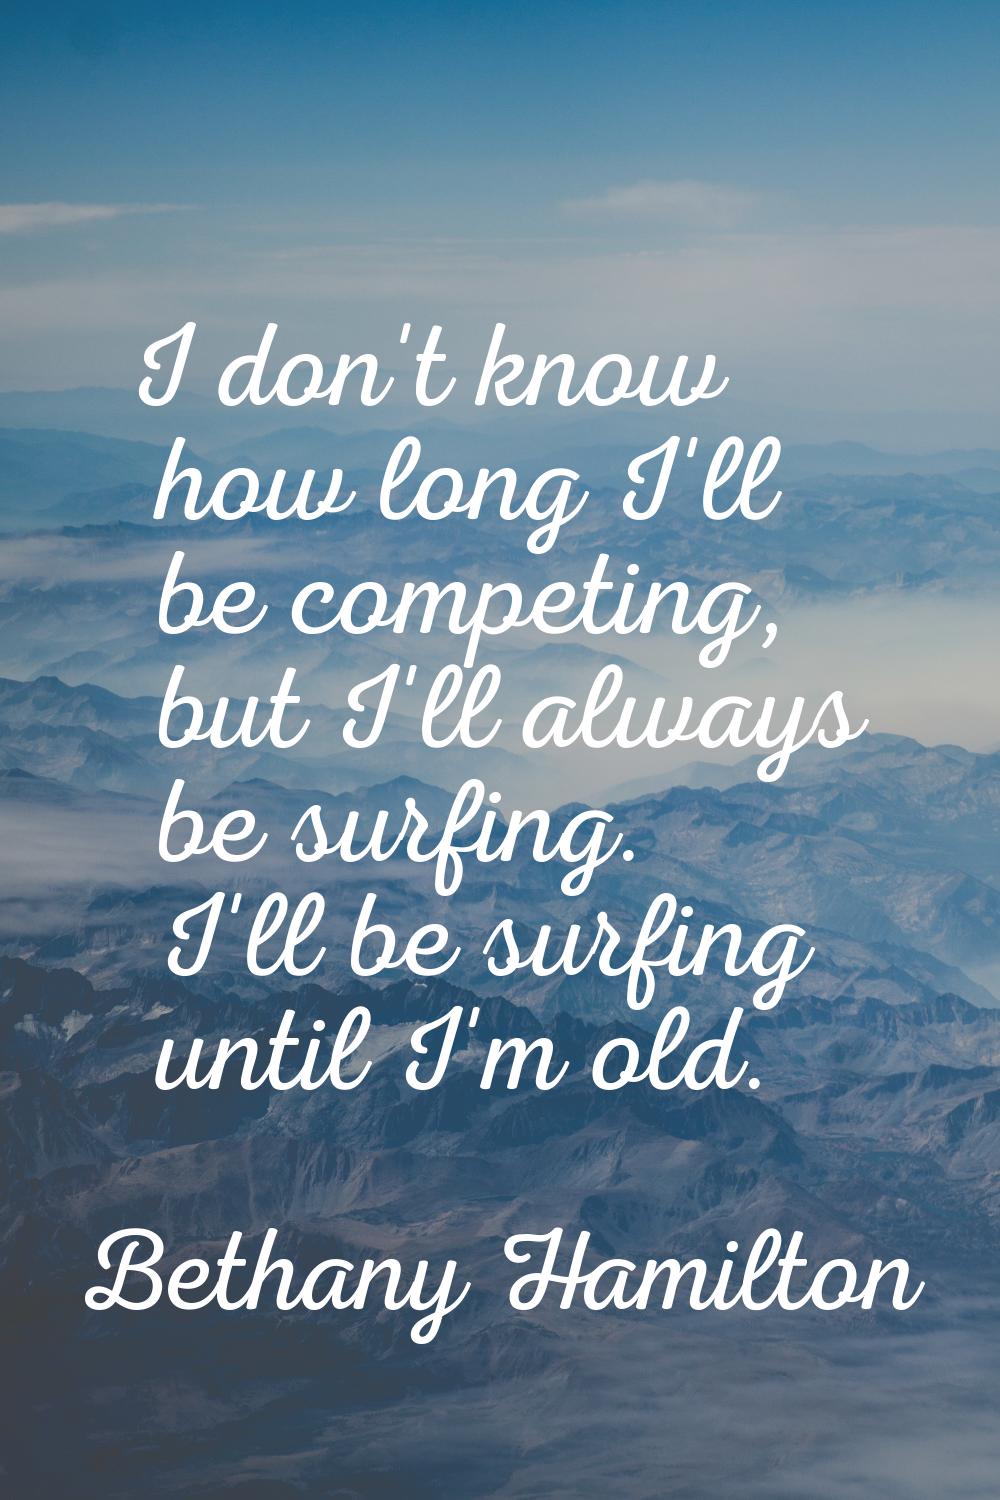 I don't know how long I'll be competing, but I'll always be surfing. I'll be surfing until I'm old.